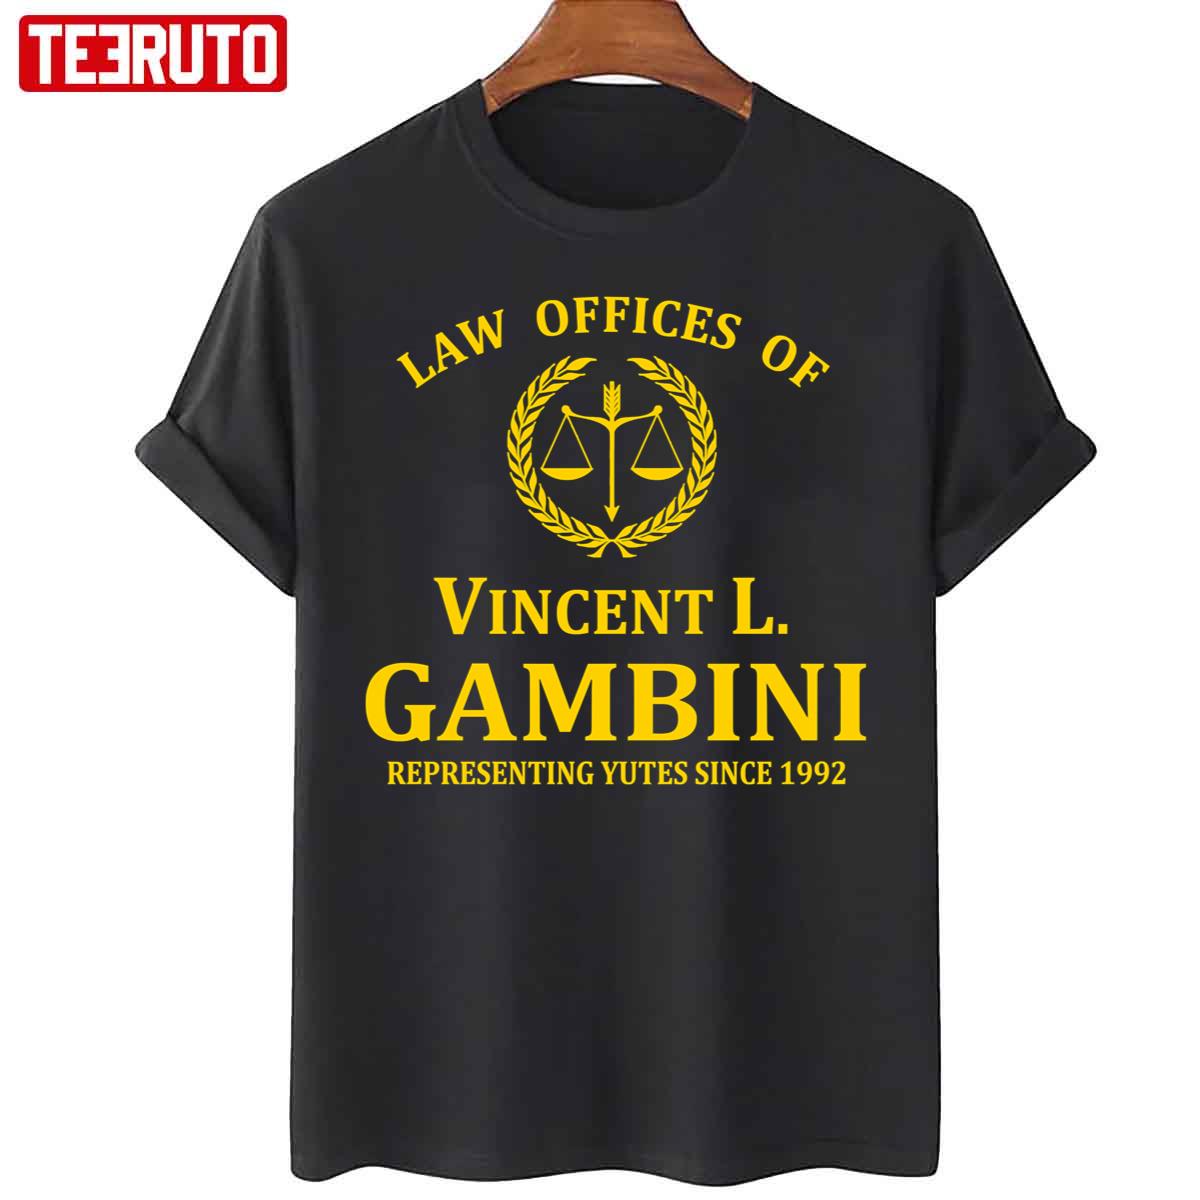 Law Offices Of Vincent L Gambini Unisex T-Shirt